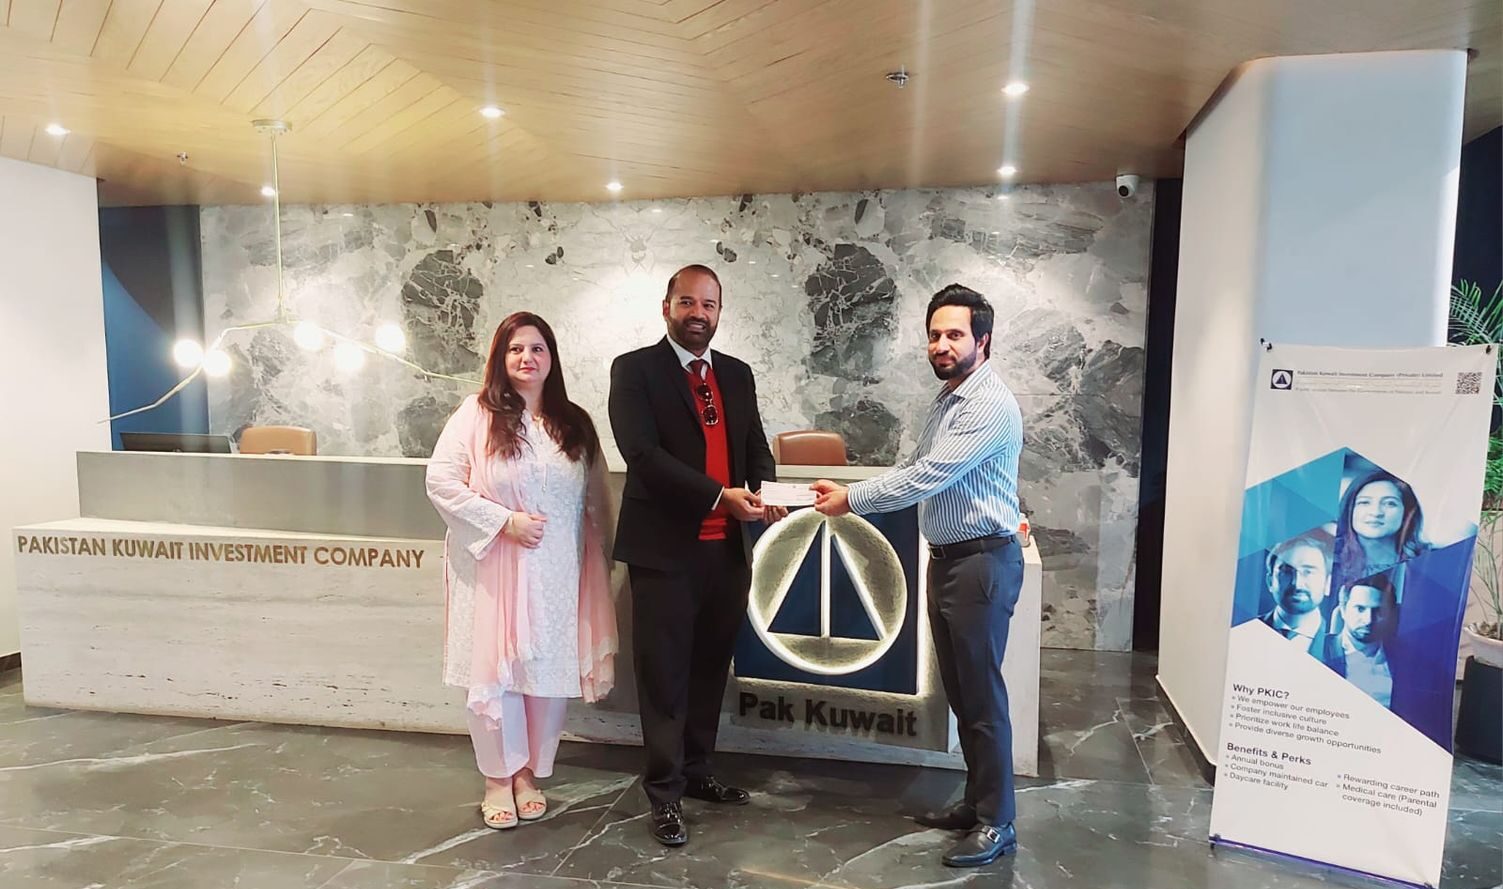 Transforming Lives: Pakistan Kuwait Investment Company Partners with Vital Pakistan Trust for Maternal Health in Karachi